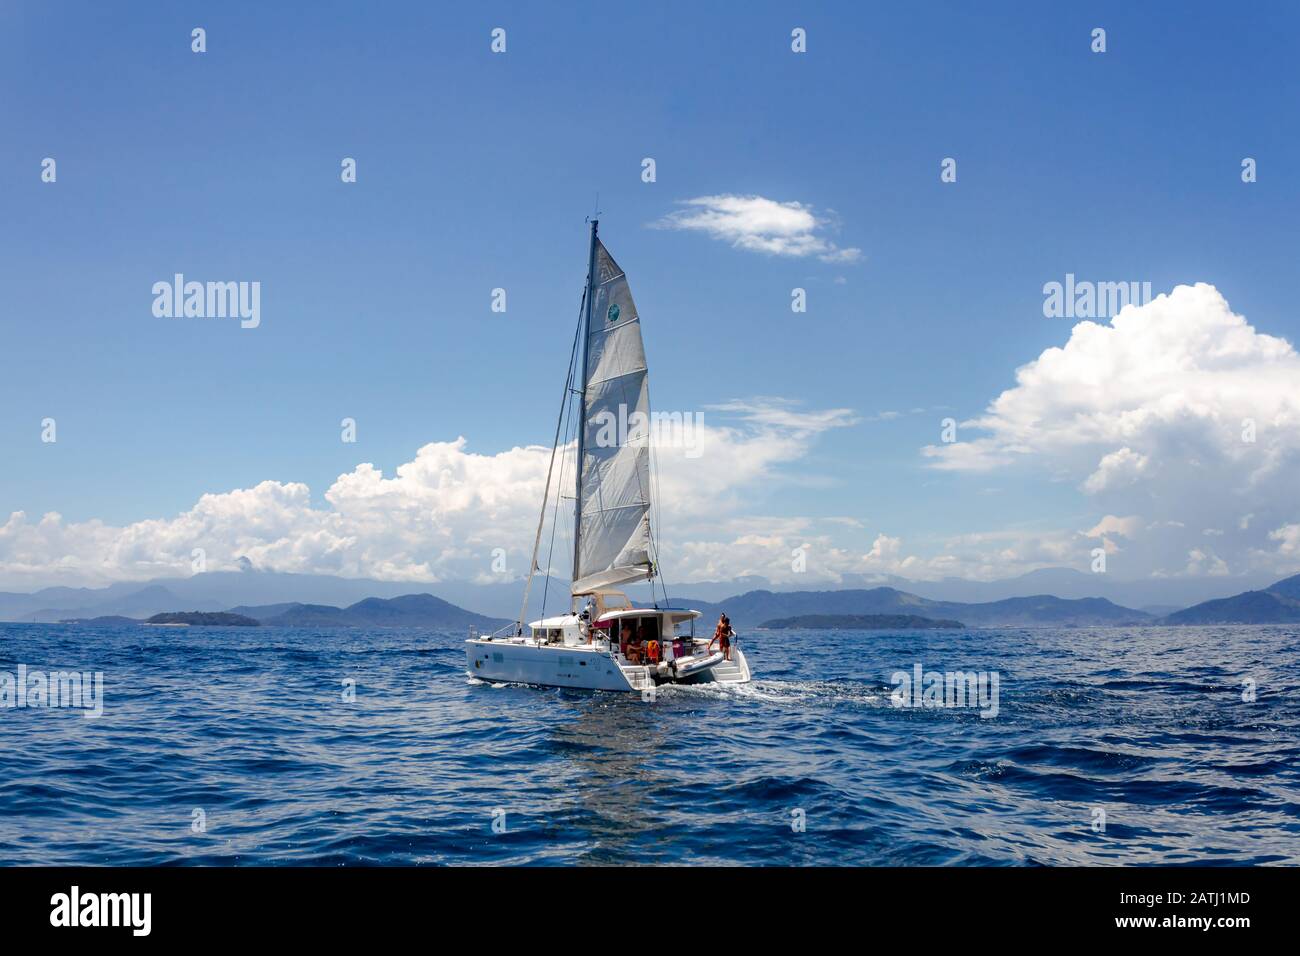 Angra dos Reis, Rio de Janeiro, December 31, 2019: Sailing Boat in Angra dos Reis bay area during the summer time. People sail around the islands in s Stock Photo